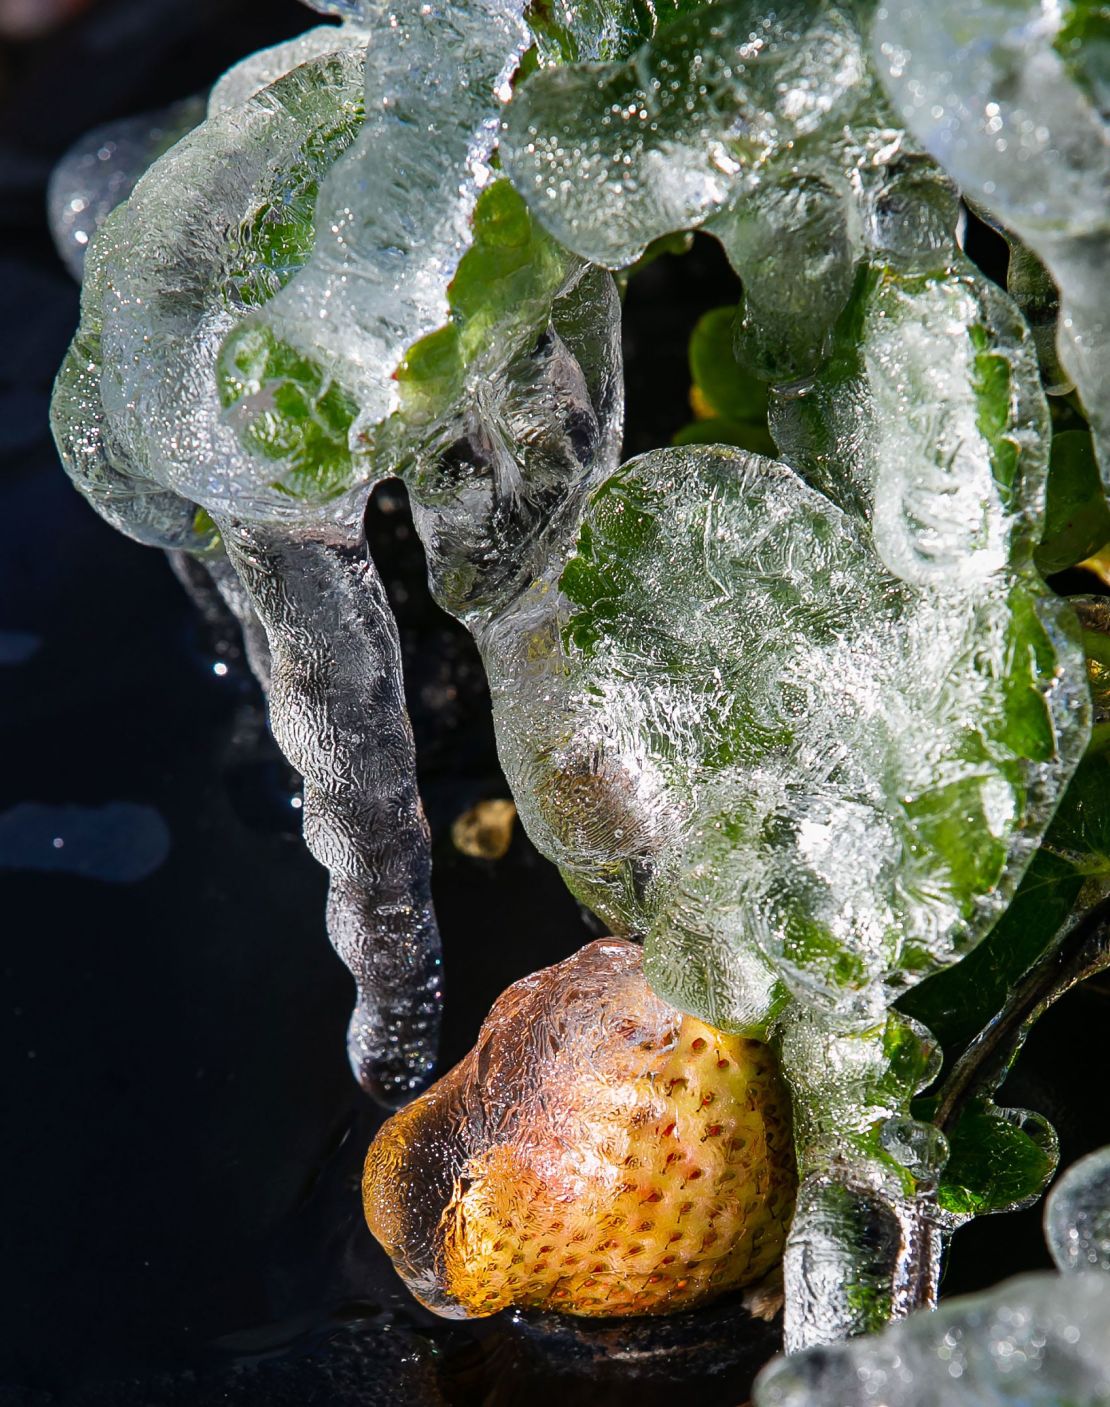 A green strawberry is protected from the freeze after being caked in ice overnight at the University of Florida/IFAS Plant Science Research and Education Unit on January 24, 2022.